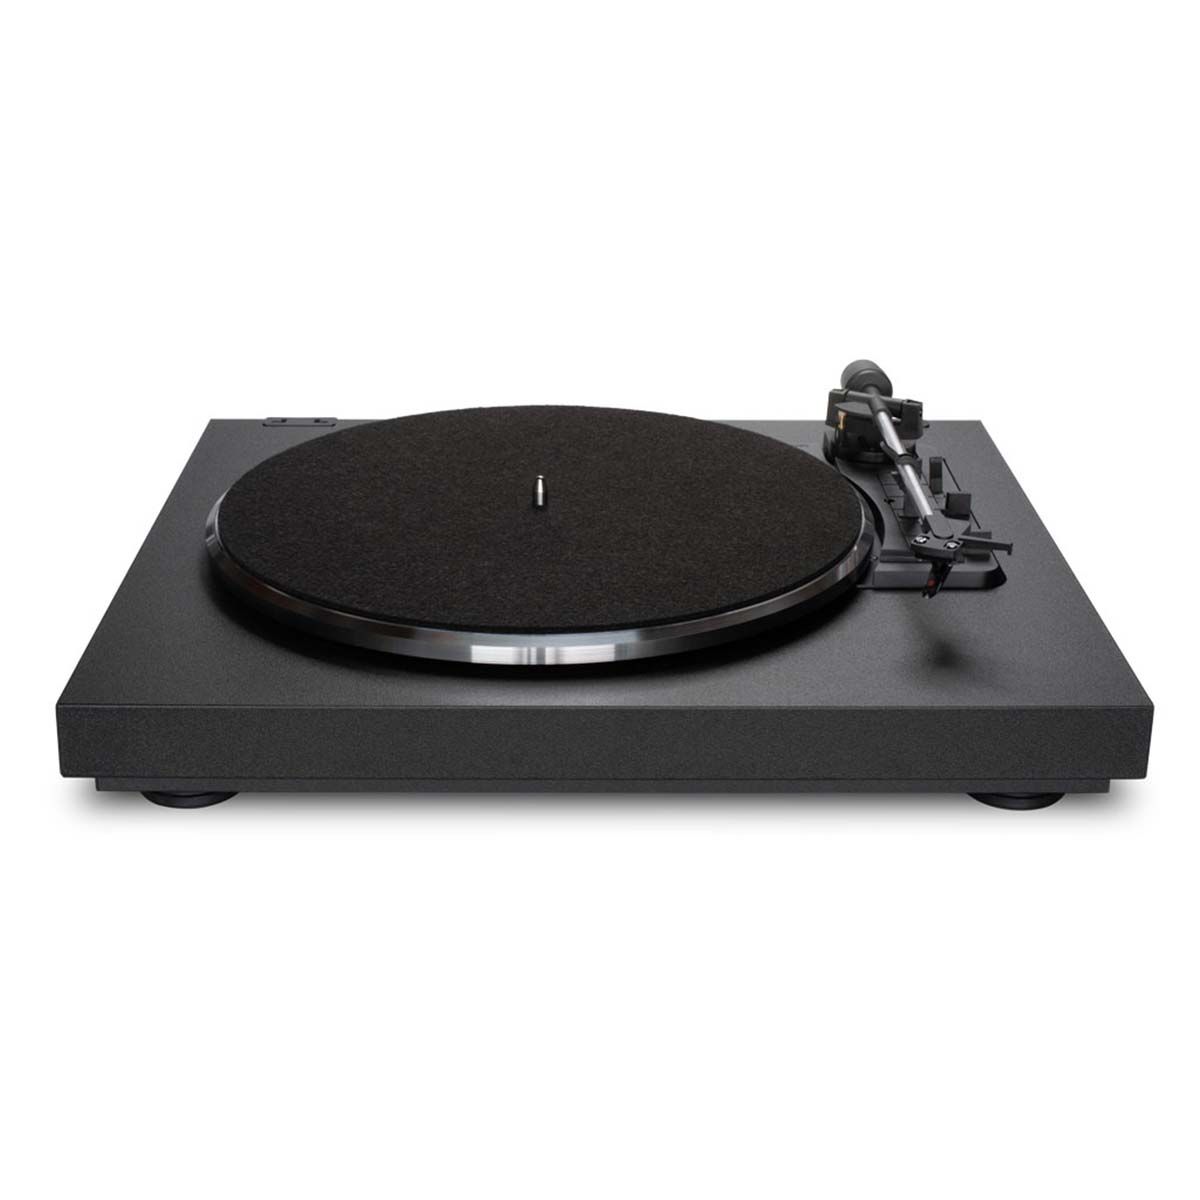 Andover SpinDeck Max Turntable, Black, front